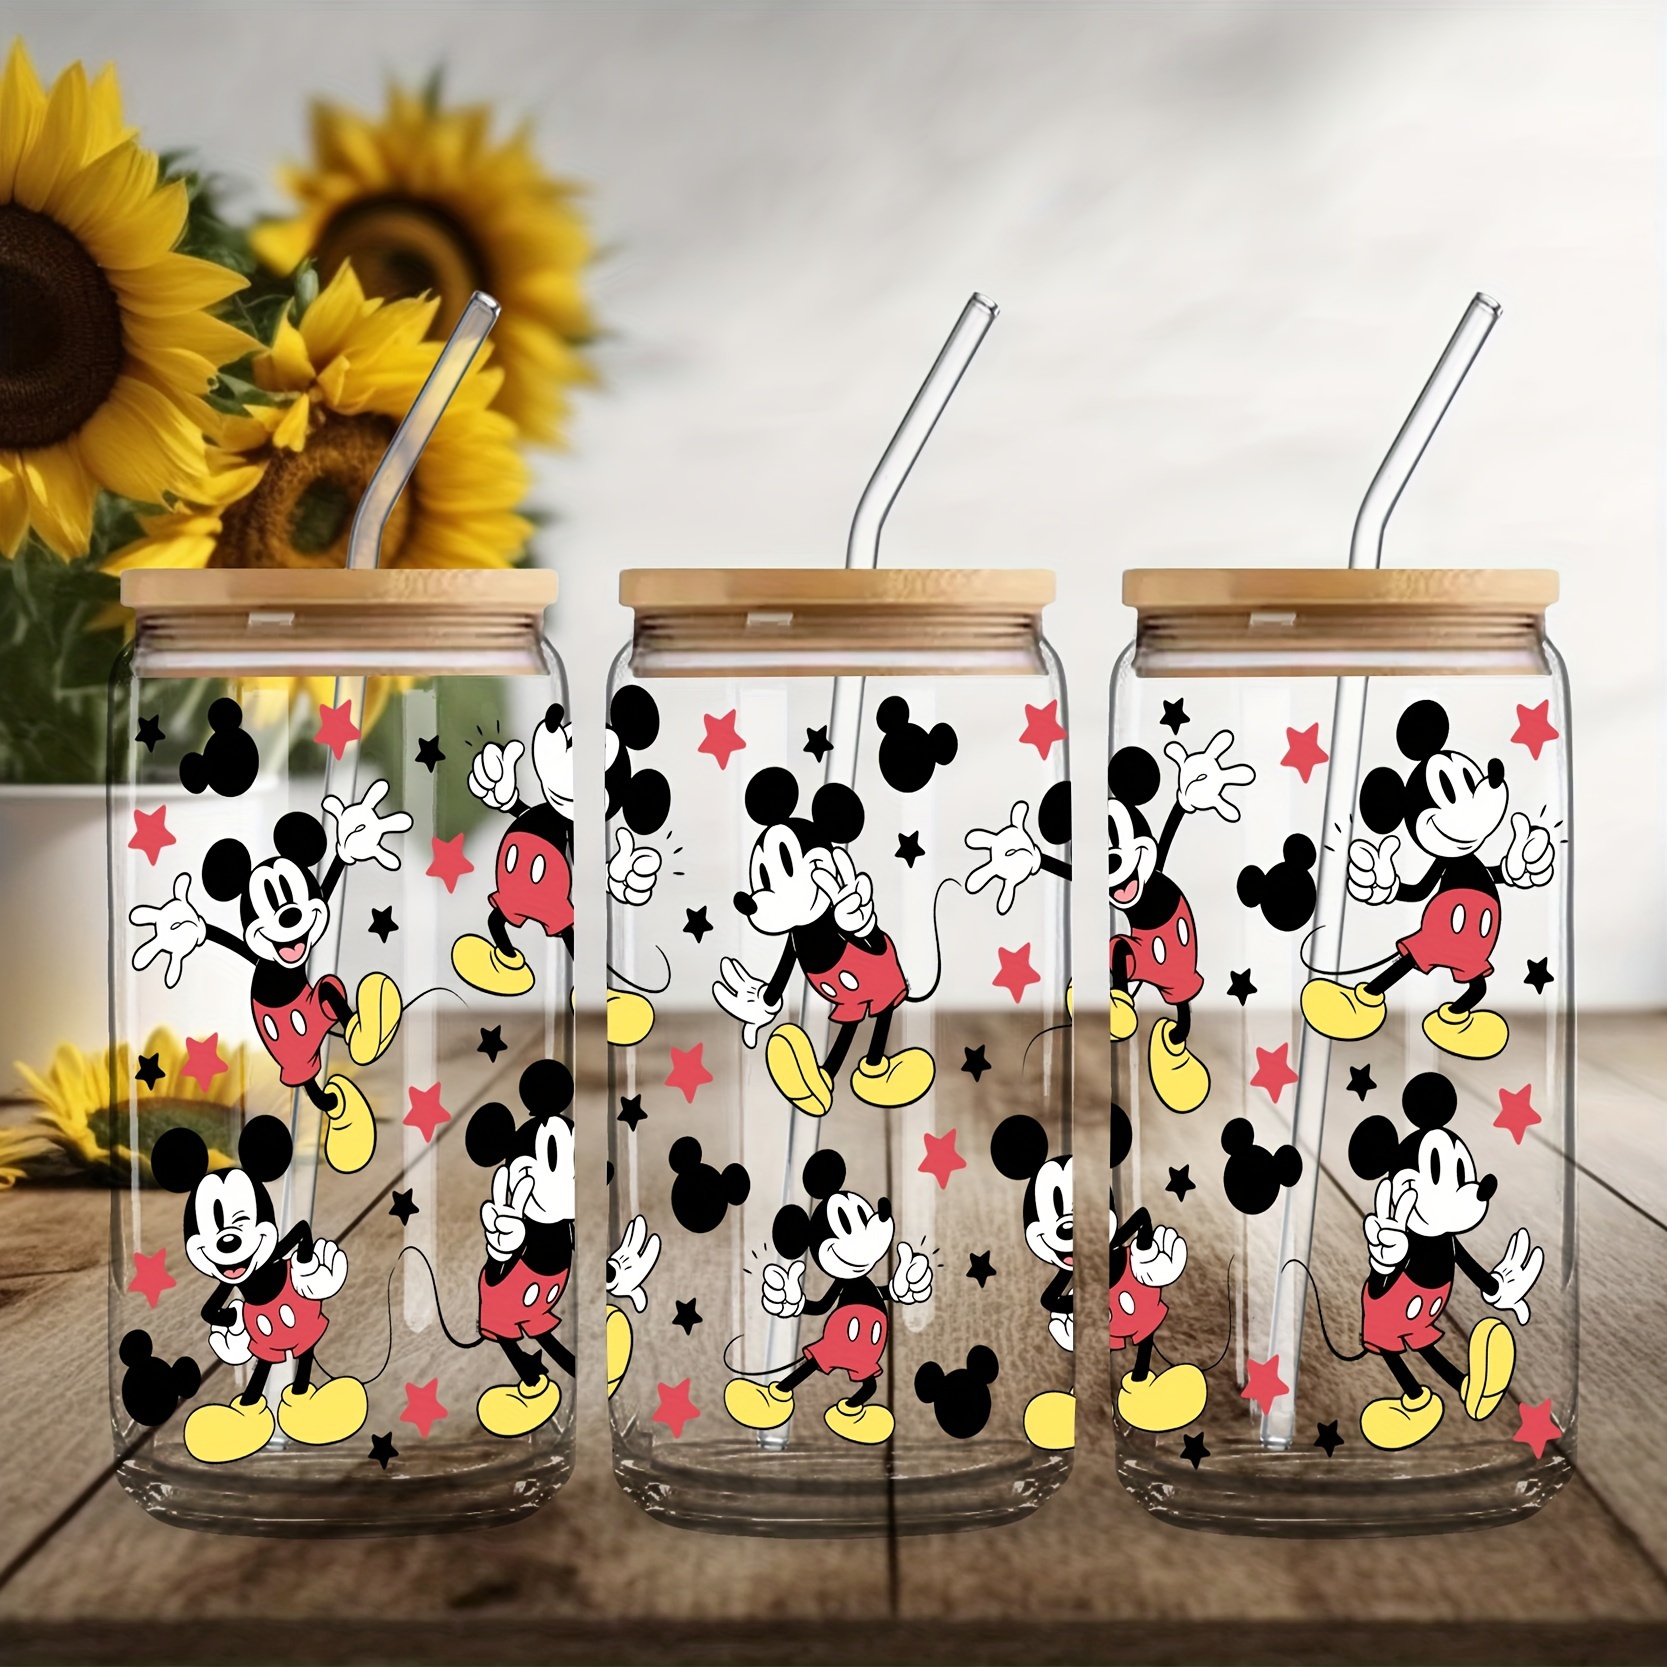 

charming Mickey" Disney Mickey Mouse 16oz Glass Tumbler With Straw - Insulated, Reusable Drinking Cup For Coffee, , Milk, Juice - Hand Wash Only